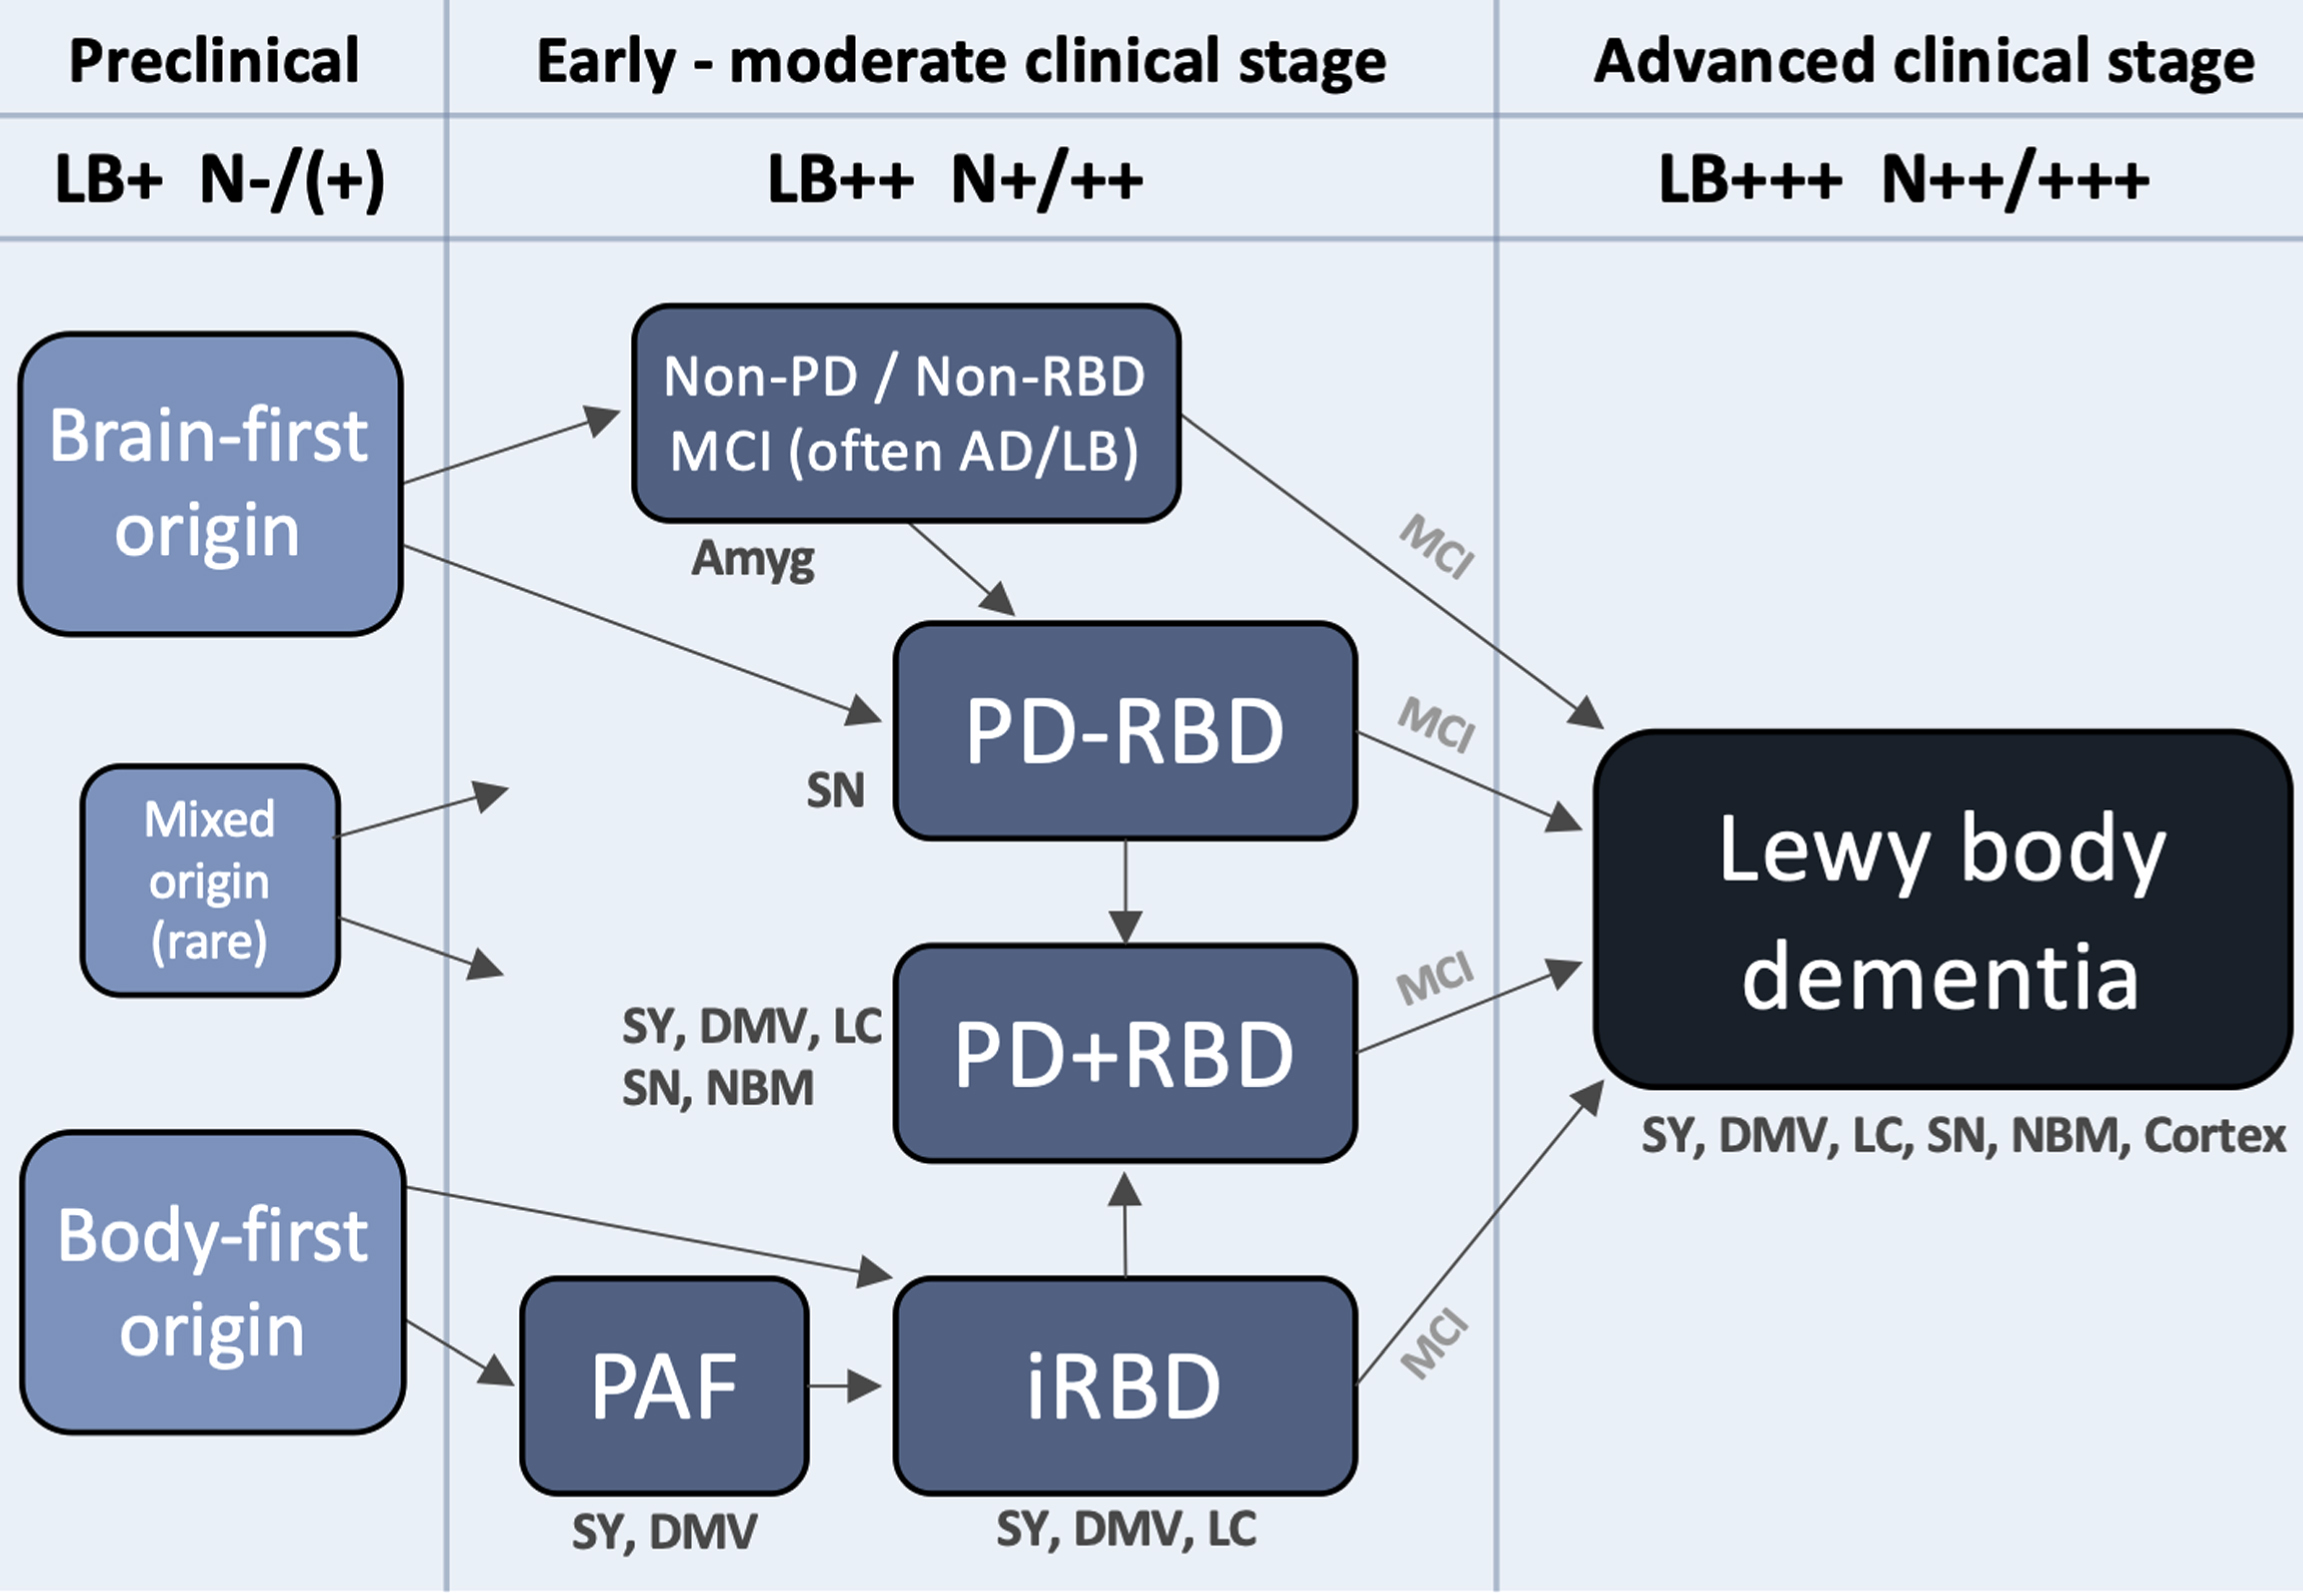 A hypothetical framework to illustrate how Lewy body disease develops from the pre-clinical stage over several possible well-defined early- and moderate clinical disease stages to converge on a more homogenous advanced disease stage, in which patients are typically demented. Rare exceptions to the shown trajectories may exist. The figure lists some neuroanatomical structures, which typically show damage during that particular clinical stage. Based on postmortem data, imaging, and clinical phenotypes, most patients can be categorized into two overall types: brain-first (olfactory/limbic-first) or a body-first (gut/autonomic-first). A small group with mixed (multi-focal) origin of αSyn-pathology may lead to equally mixed clinical symptom subtypes. Irrespective of the origin of αSyn-pathology, and of the heterogeneity seen in symptoms, neurodegeneration, and αSyn deposition during earlier clinical subtypes, patients will tend to converge on a homogenous advanced stage characterized by widespread αSyn pathology and neurodegeneration, parkinsonism, RBD, non-motor symptoms, and cognitive decline. The figure also depicts approximate amounts of Lewy pathology (LB) deposition, and neurodegeneration (N). Pre-clinically, patients are by definition LB-positive but the level of neurodegeneration N, if any, is insufficient to cause symptoms. Conversely, in the advanced stage, widespread LB pathology in peripheral and CNS structures are commonly seen accompanied by marked multi-system neurodegeneration. Amyg, amygdala; DMV, dorsal motor nucleus of vagus; LC, locus coeruleus; MCI, mild cognitive impairment; NBM, nucleus basalis of Meynert; SY, sympathetic ganglia and fibers.